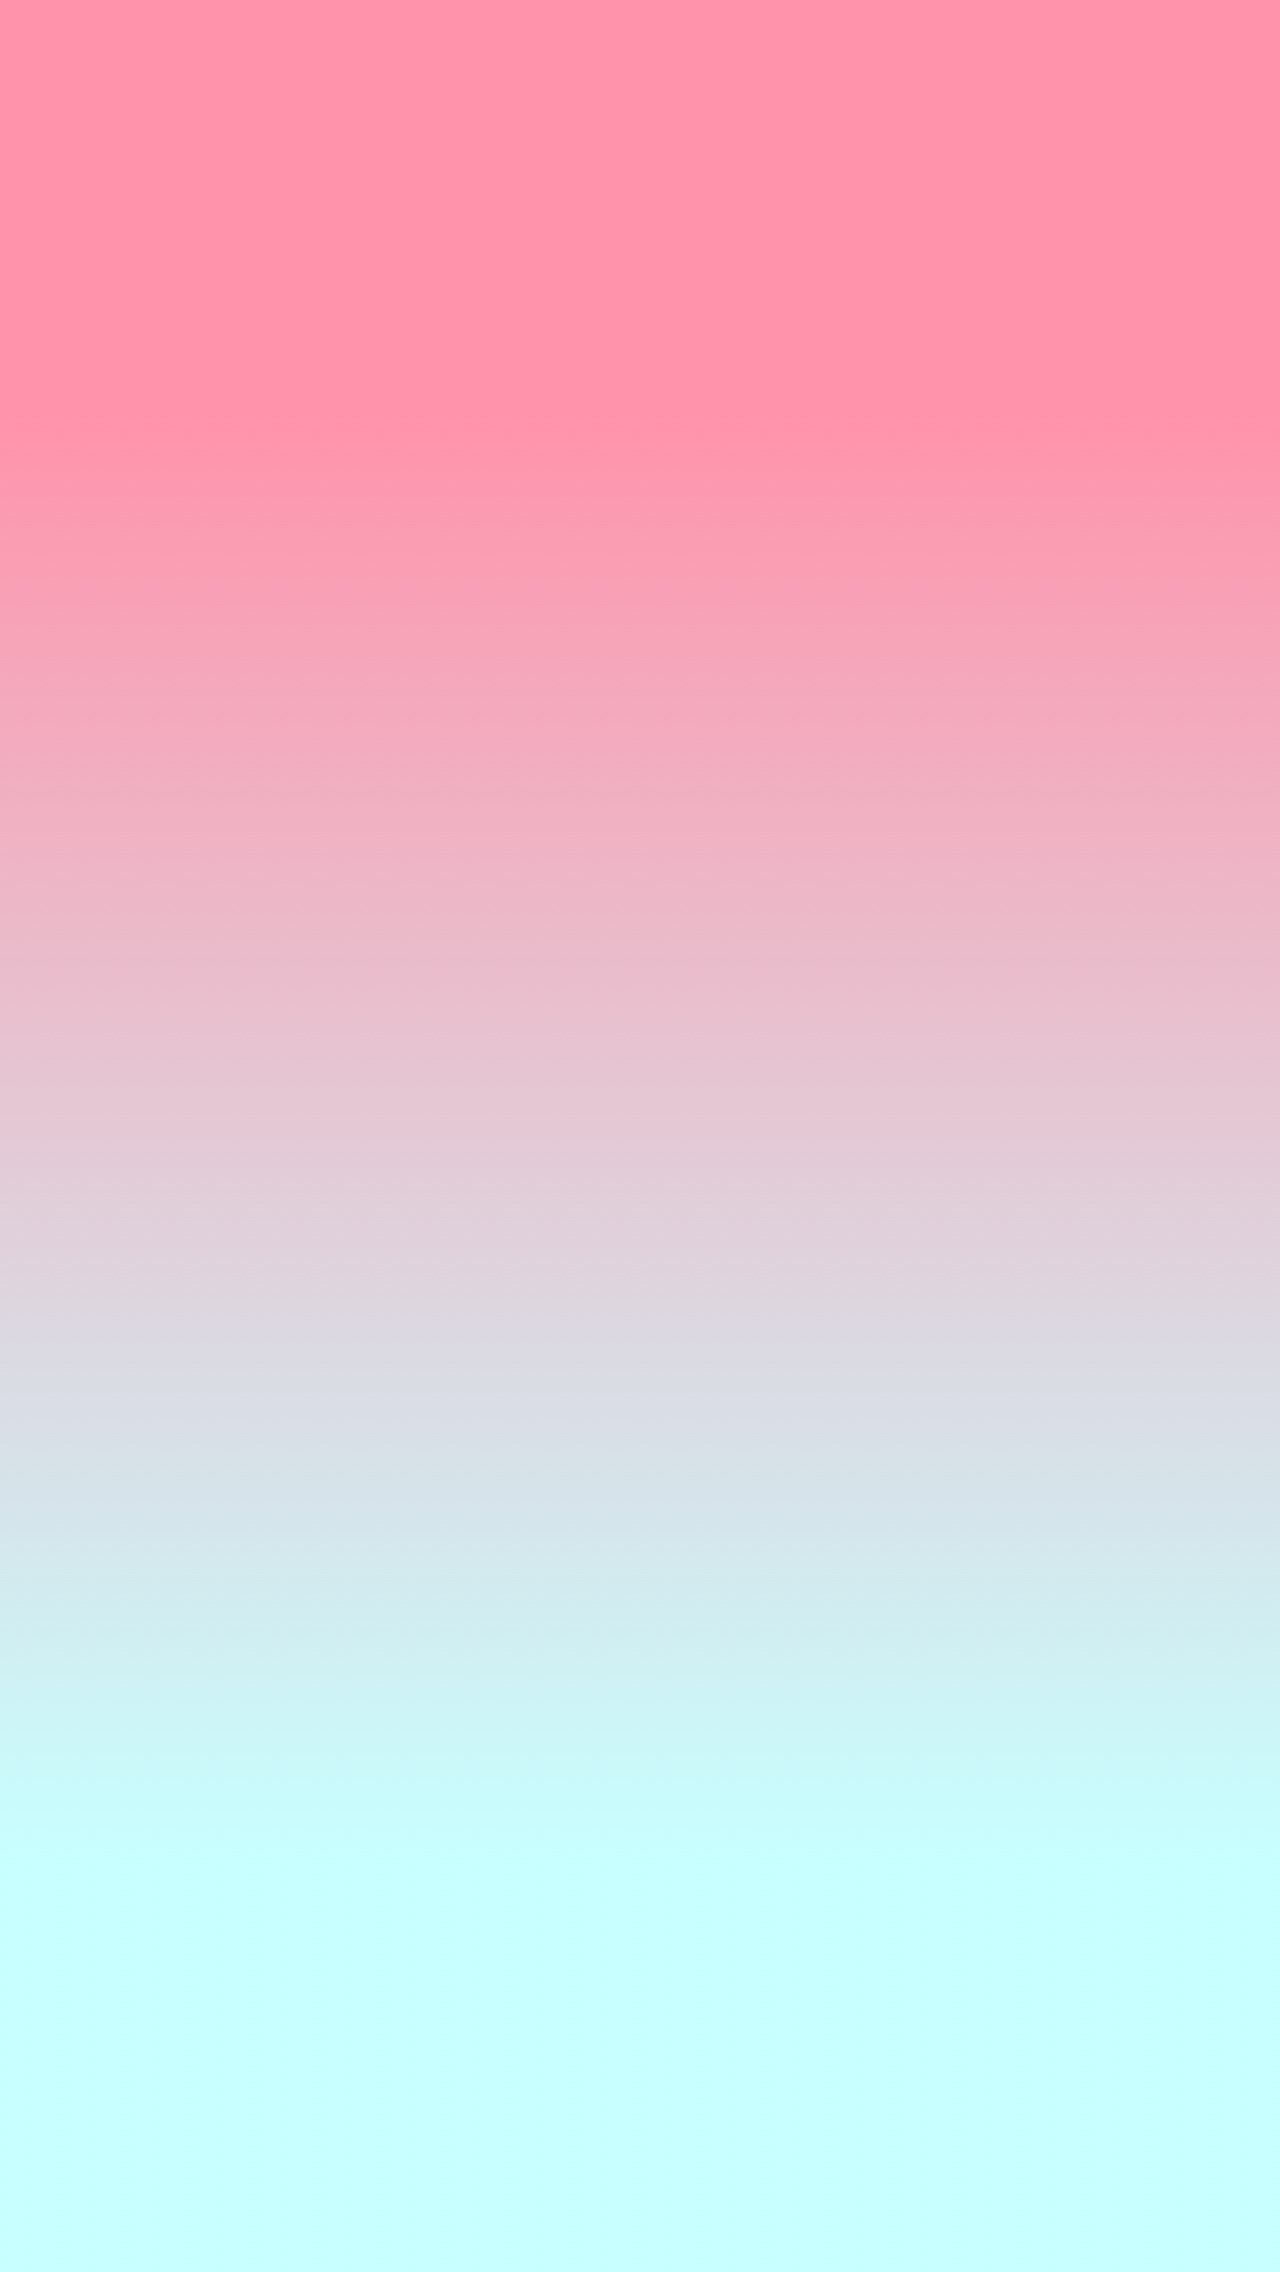 Blue and pink ombre wallpaper